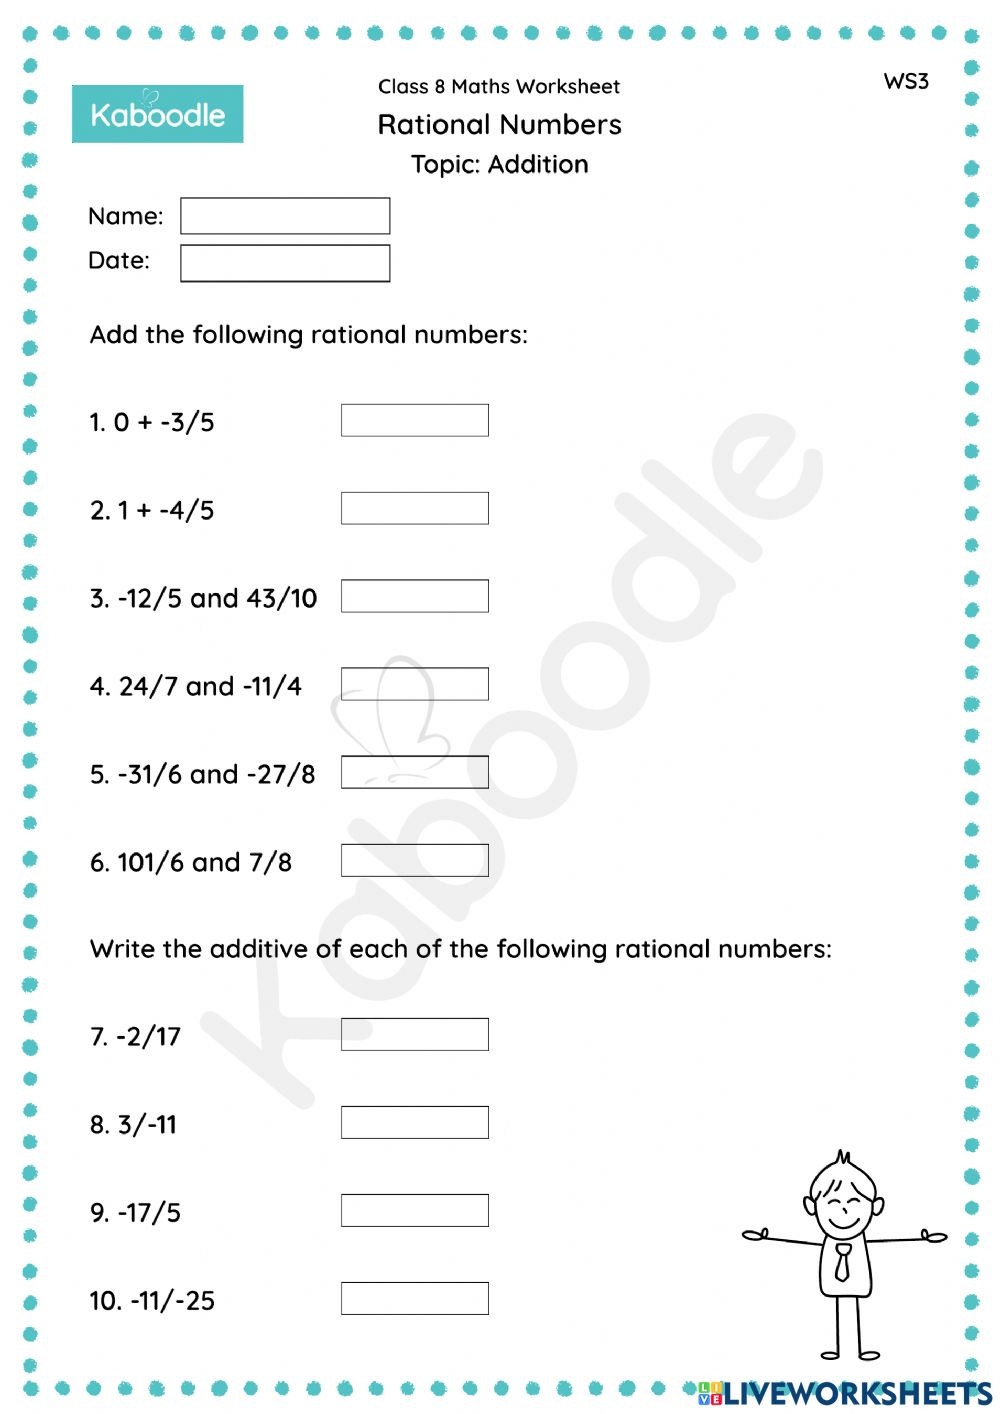 rational-numbers-addition-exercise-math-worksheet-answers